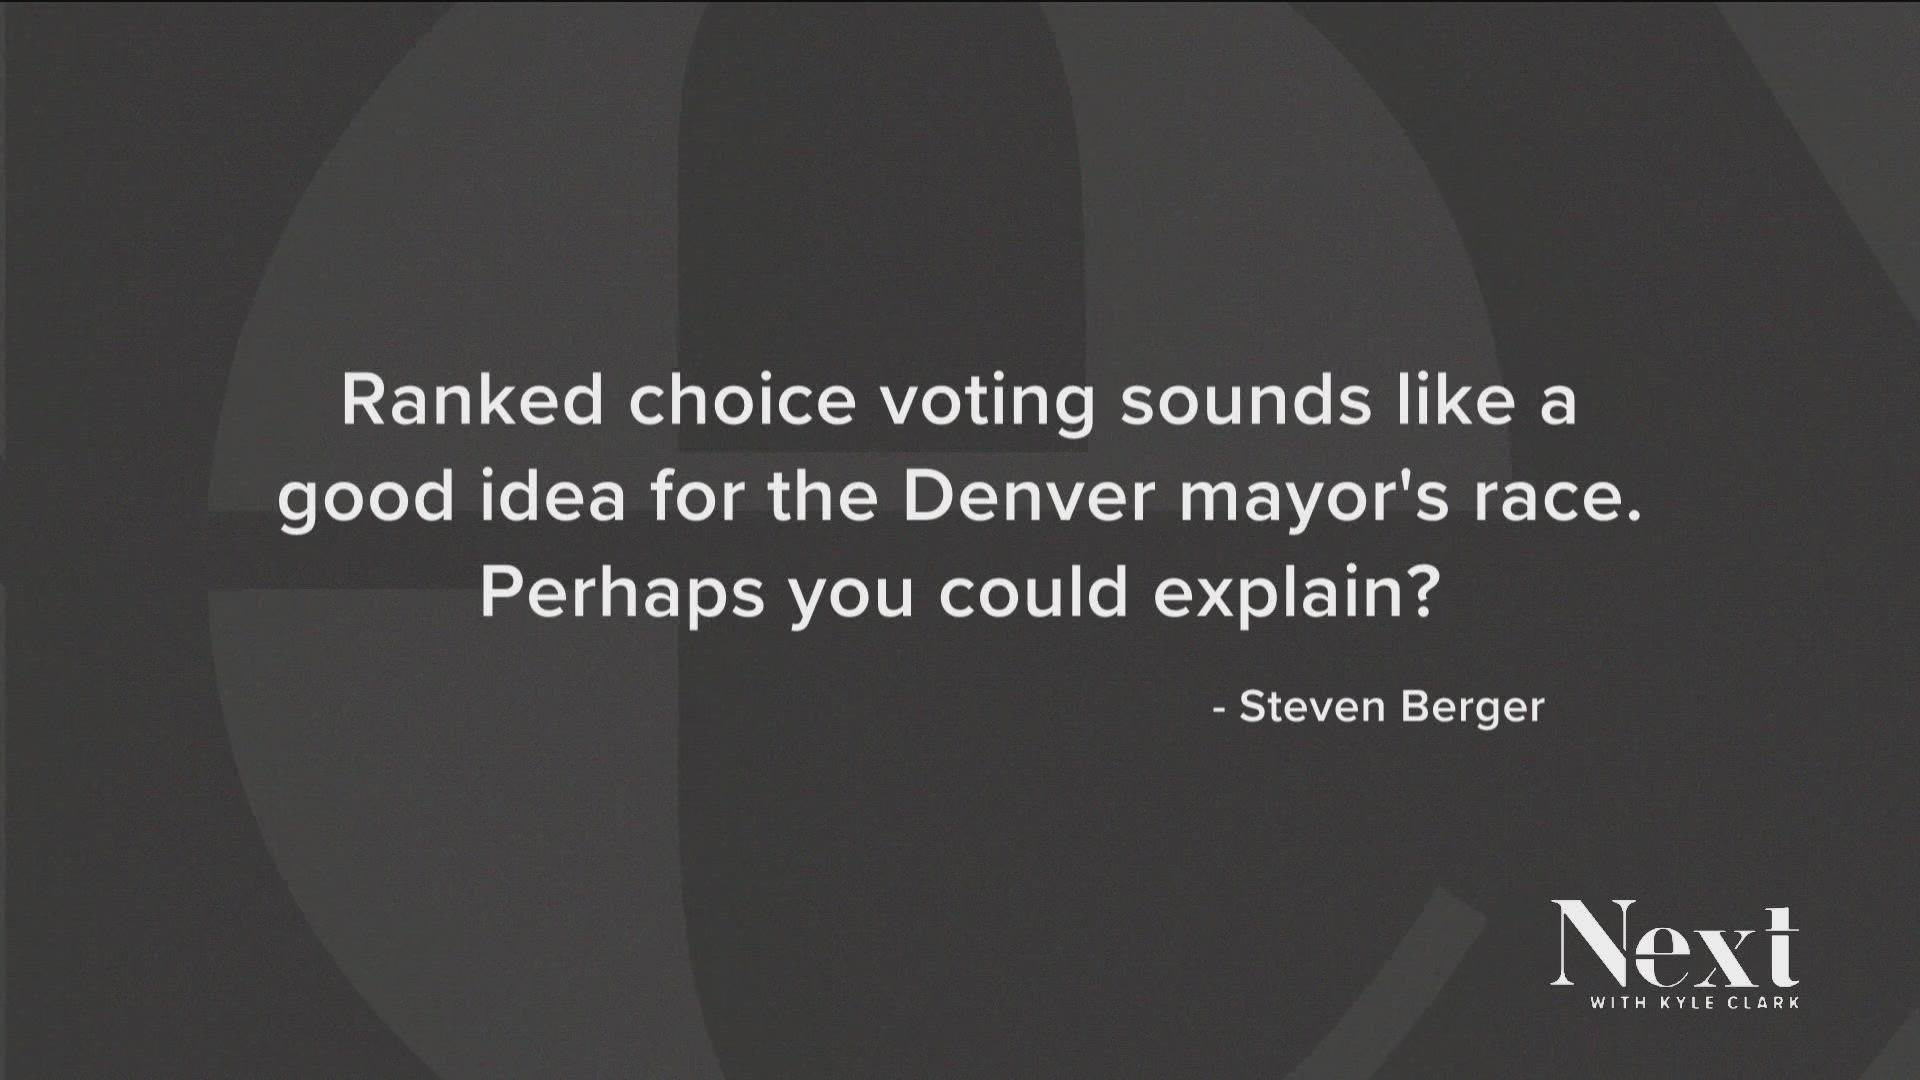 To get to that point, ranked choice voting would first have to be approved by the voters.